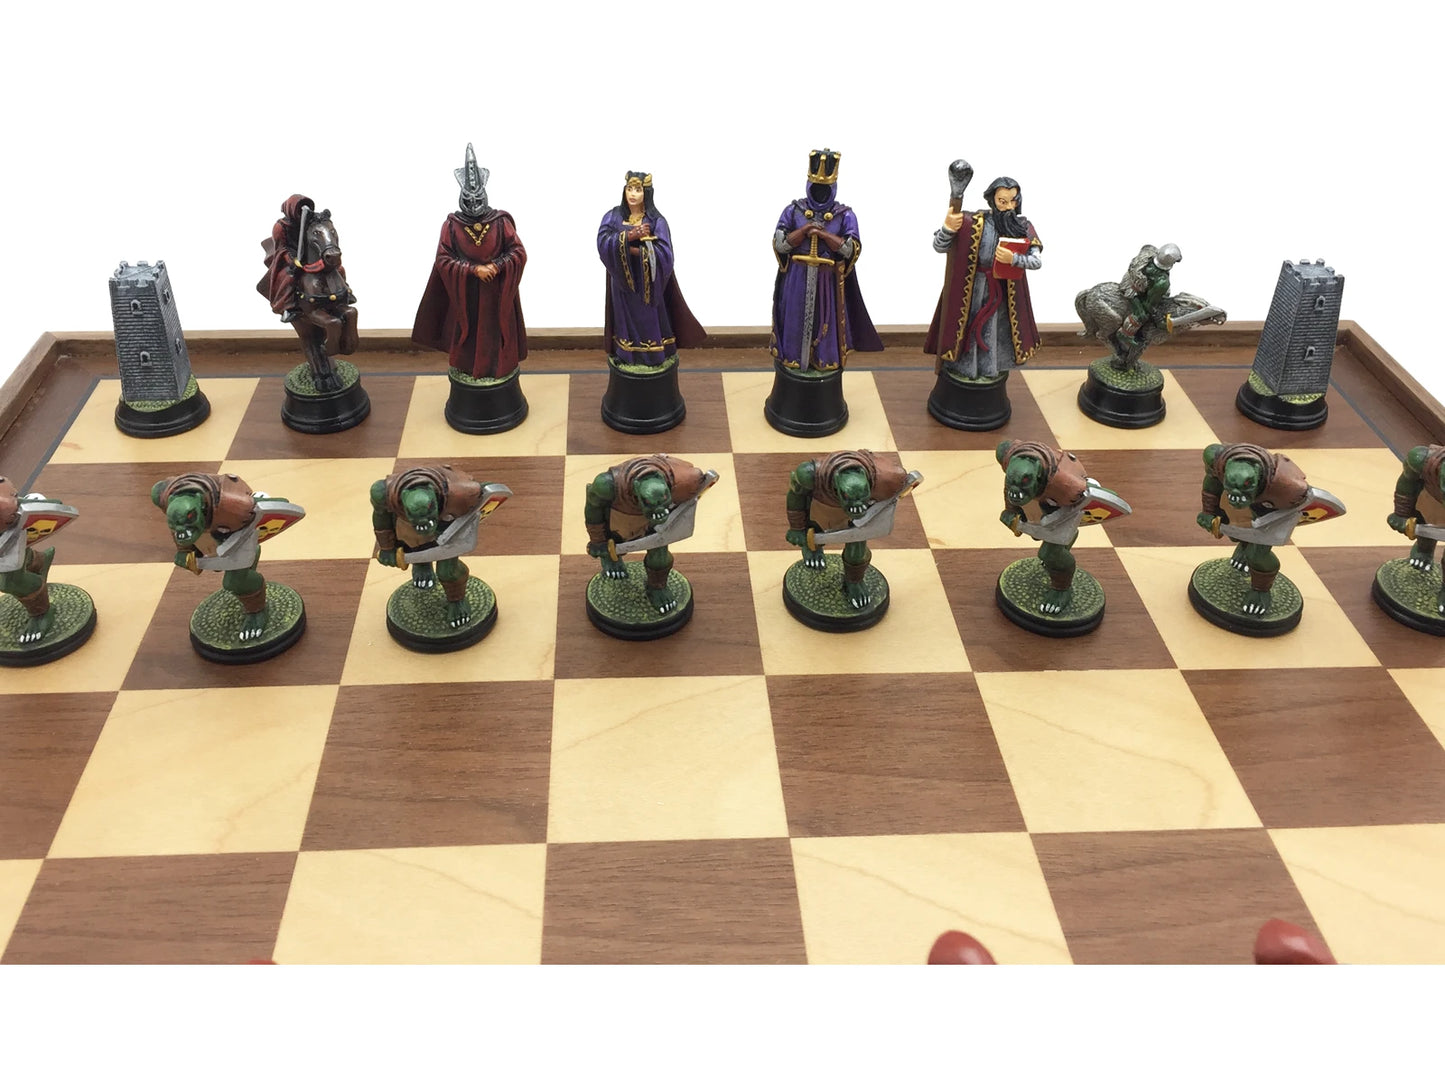 Toy soldier miniature army men Fantasy Chess Set. Close up.